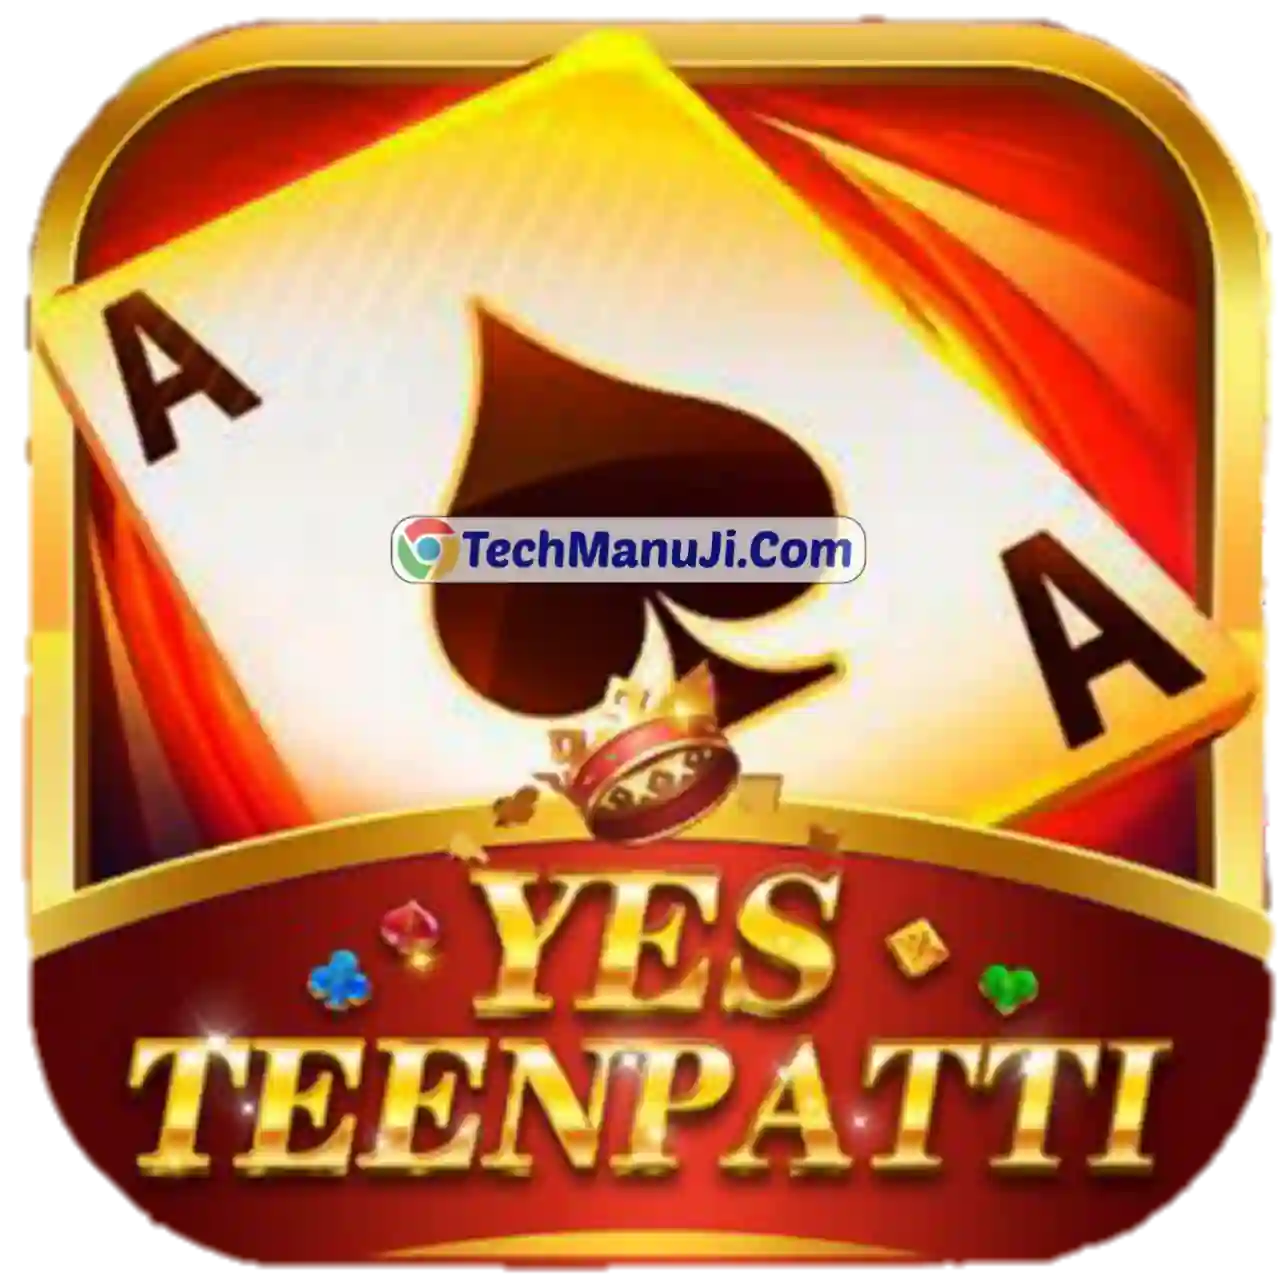 Teen Patti Yes Apk Download